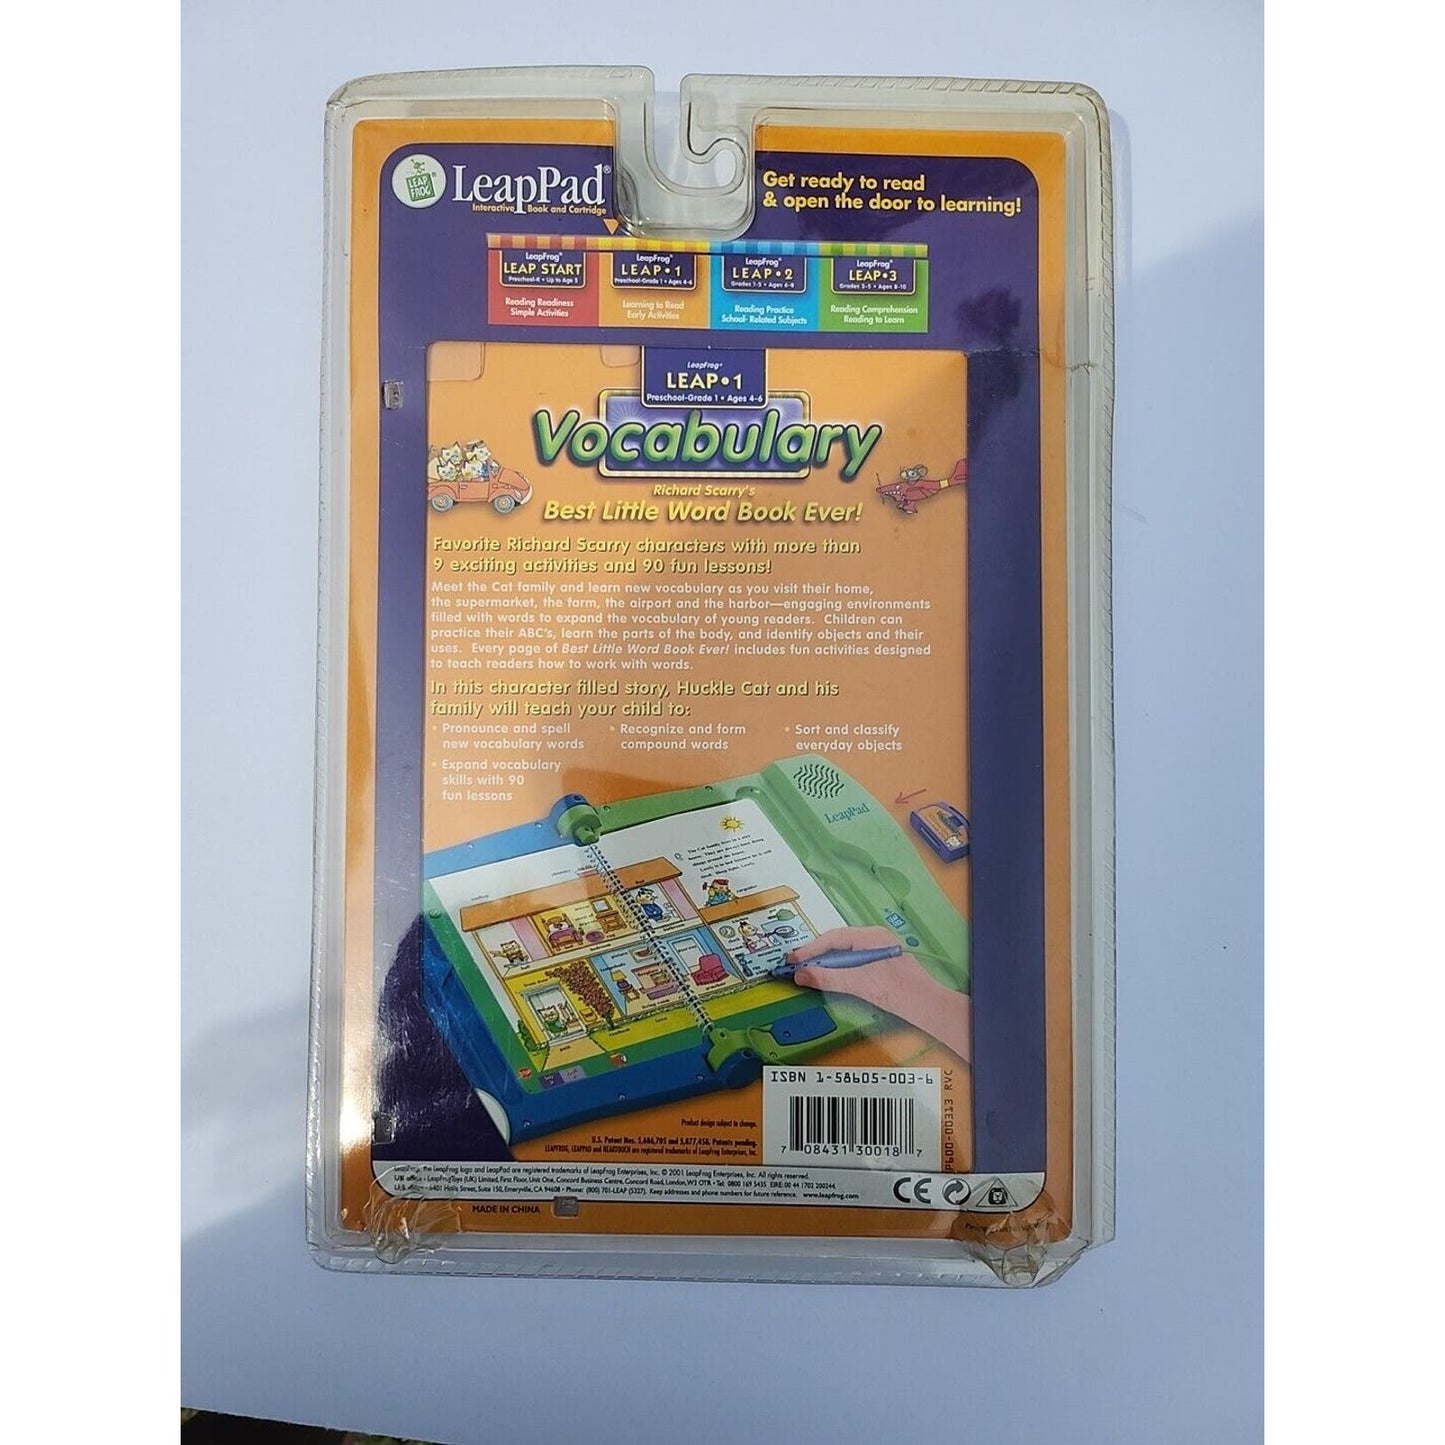 LeapPad Leap 1 Vocabulary Best Little Word Book and Cartridge Richard Scarry NOS